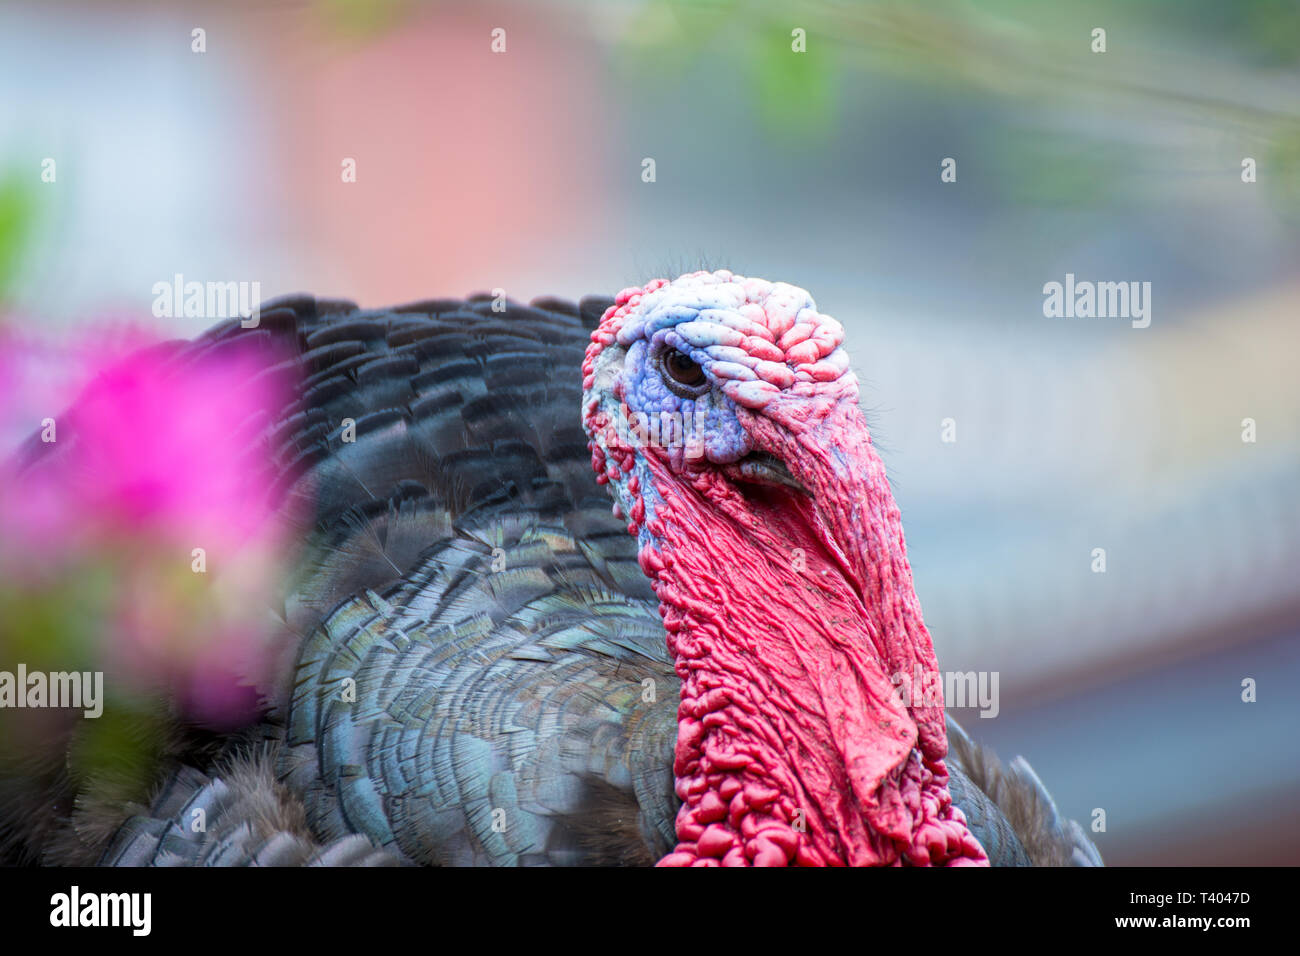 Head of a turkey with bright red and blue colors and a green meadow as background Stock Photo